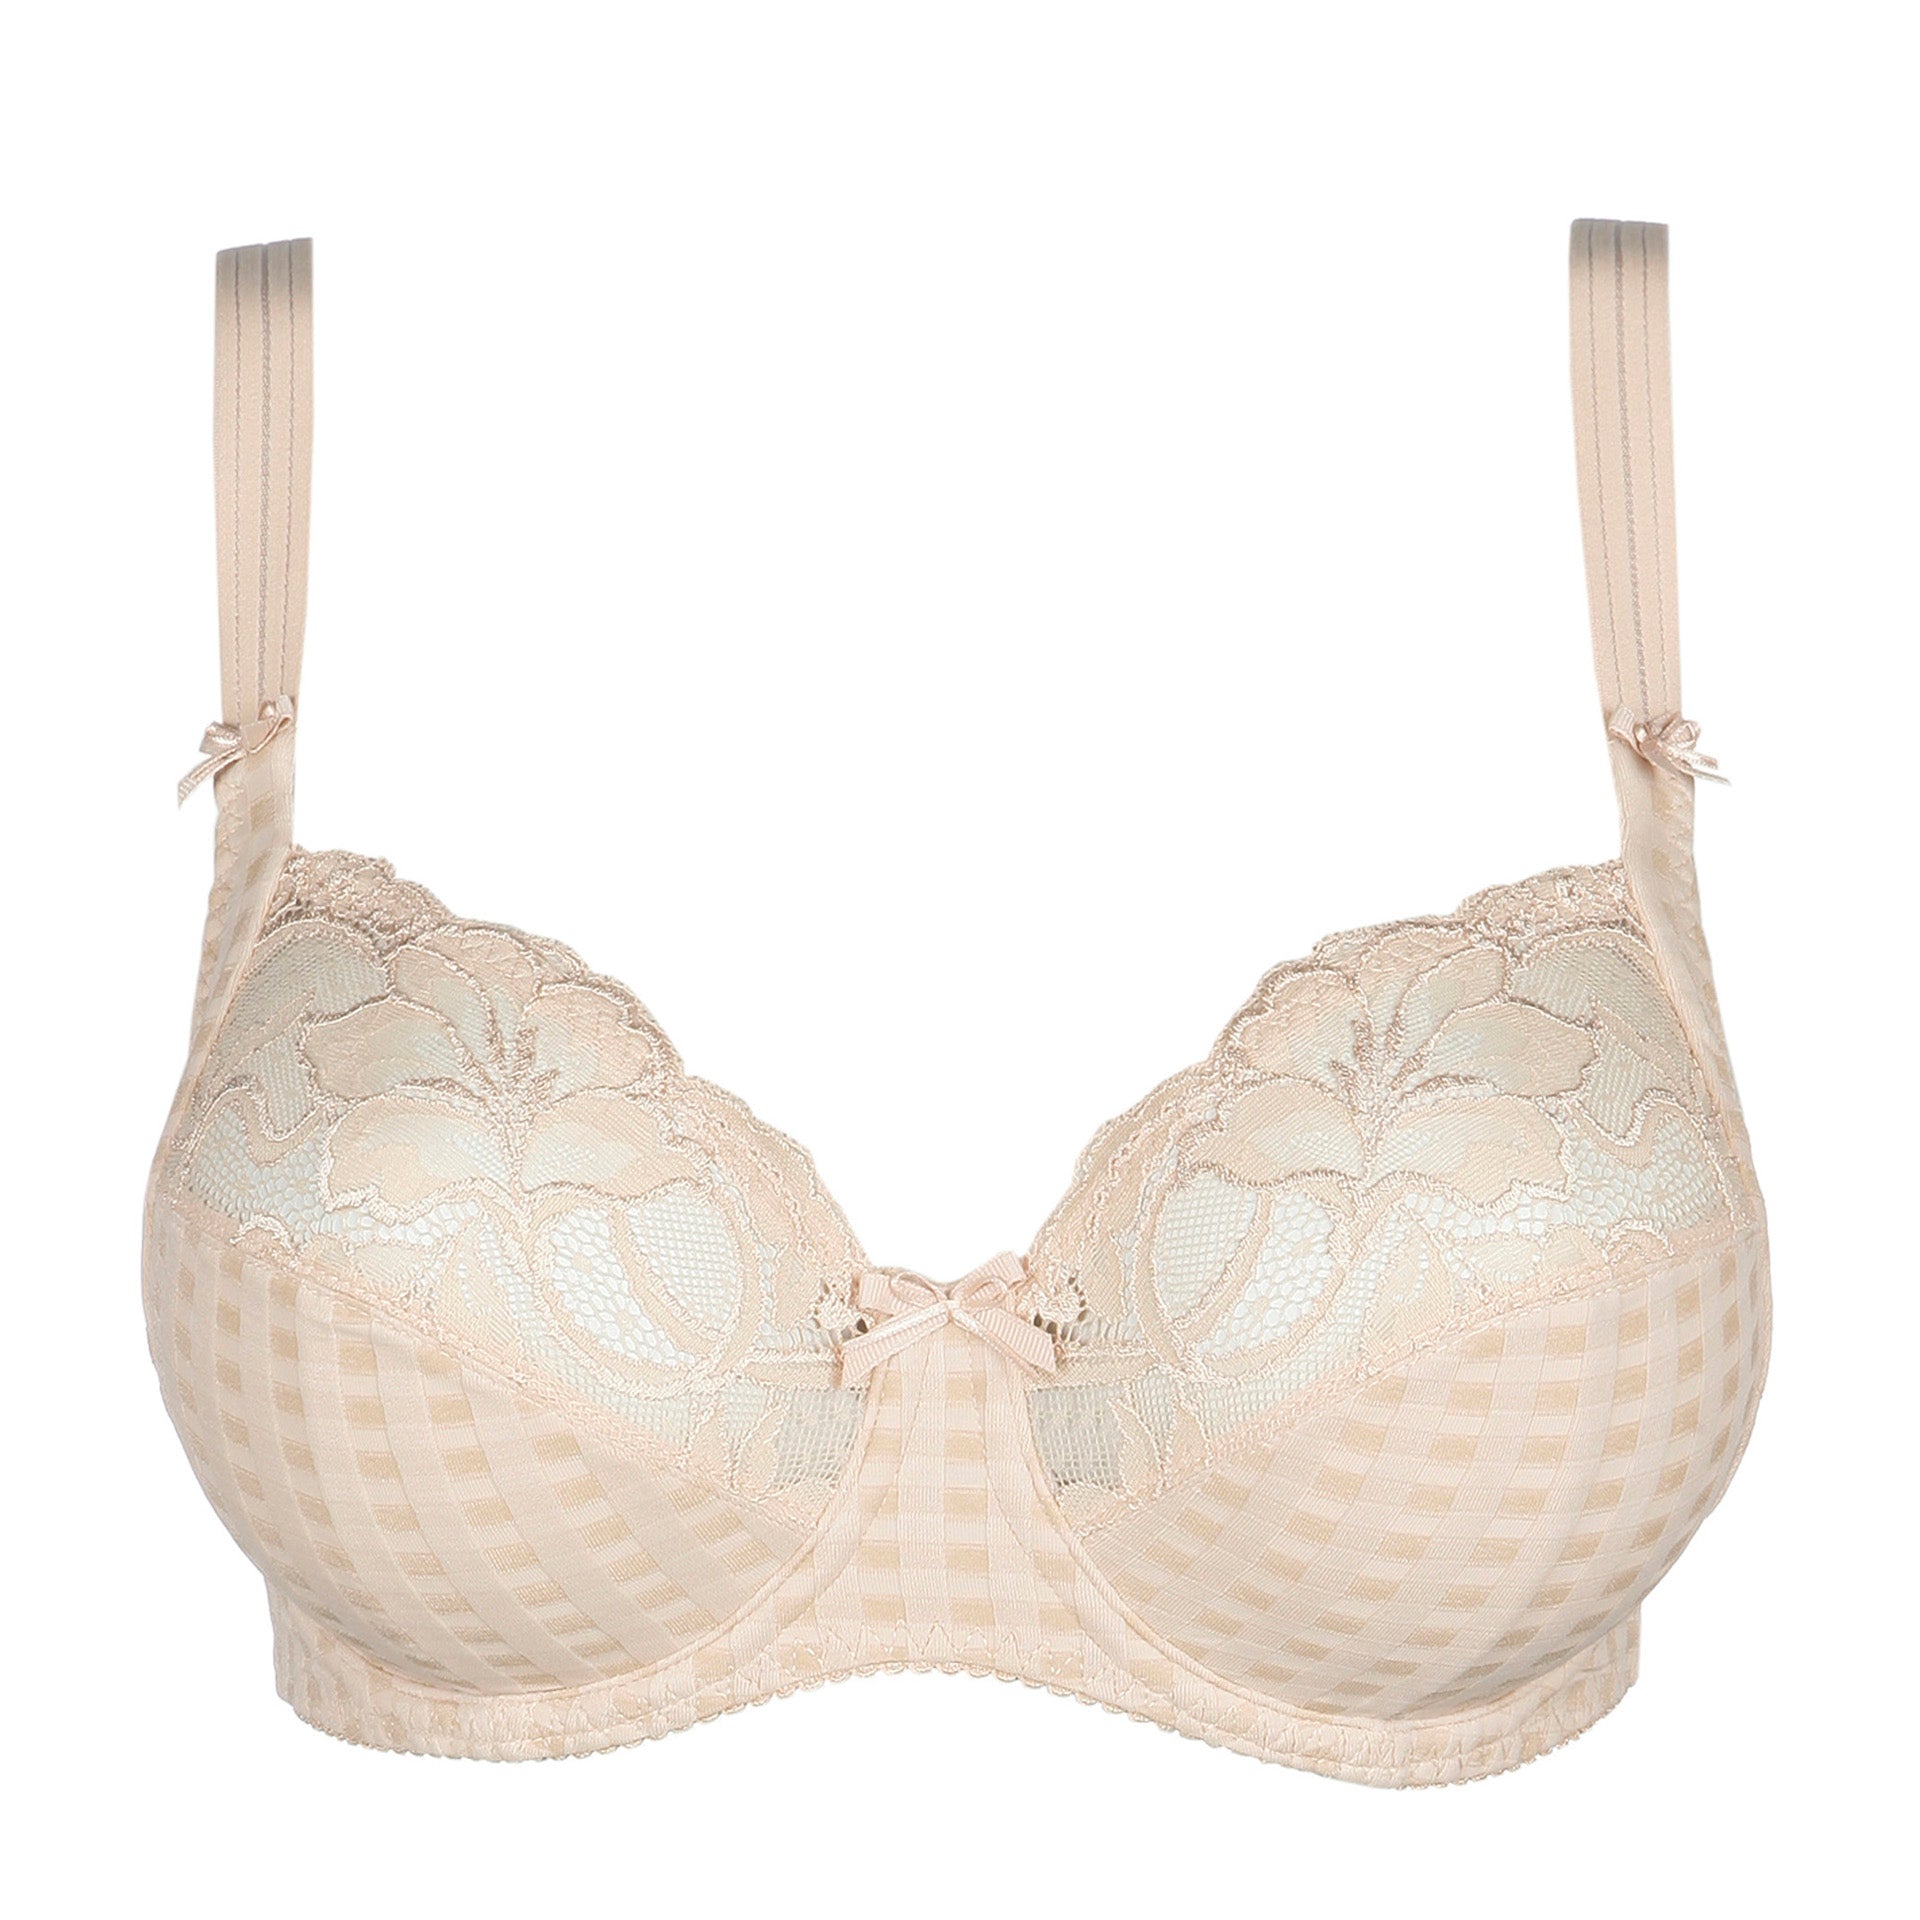 Madison full cup bra in Caffe Latte by PrimaDonna.